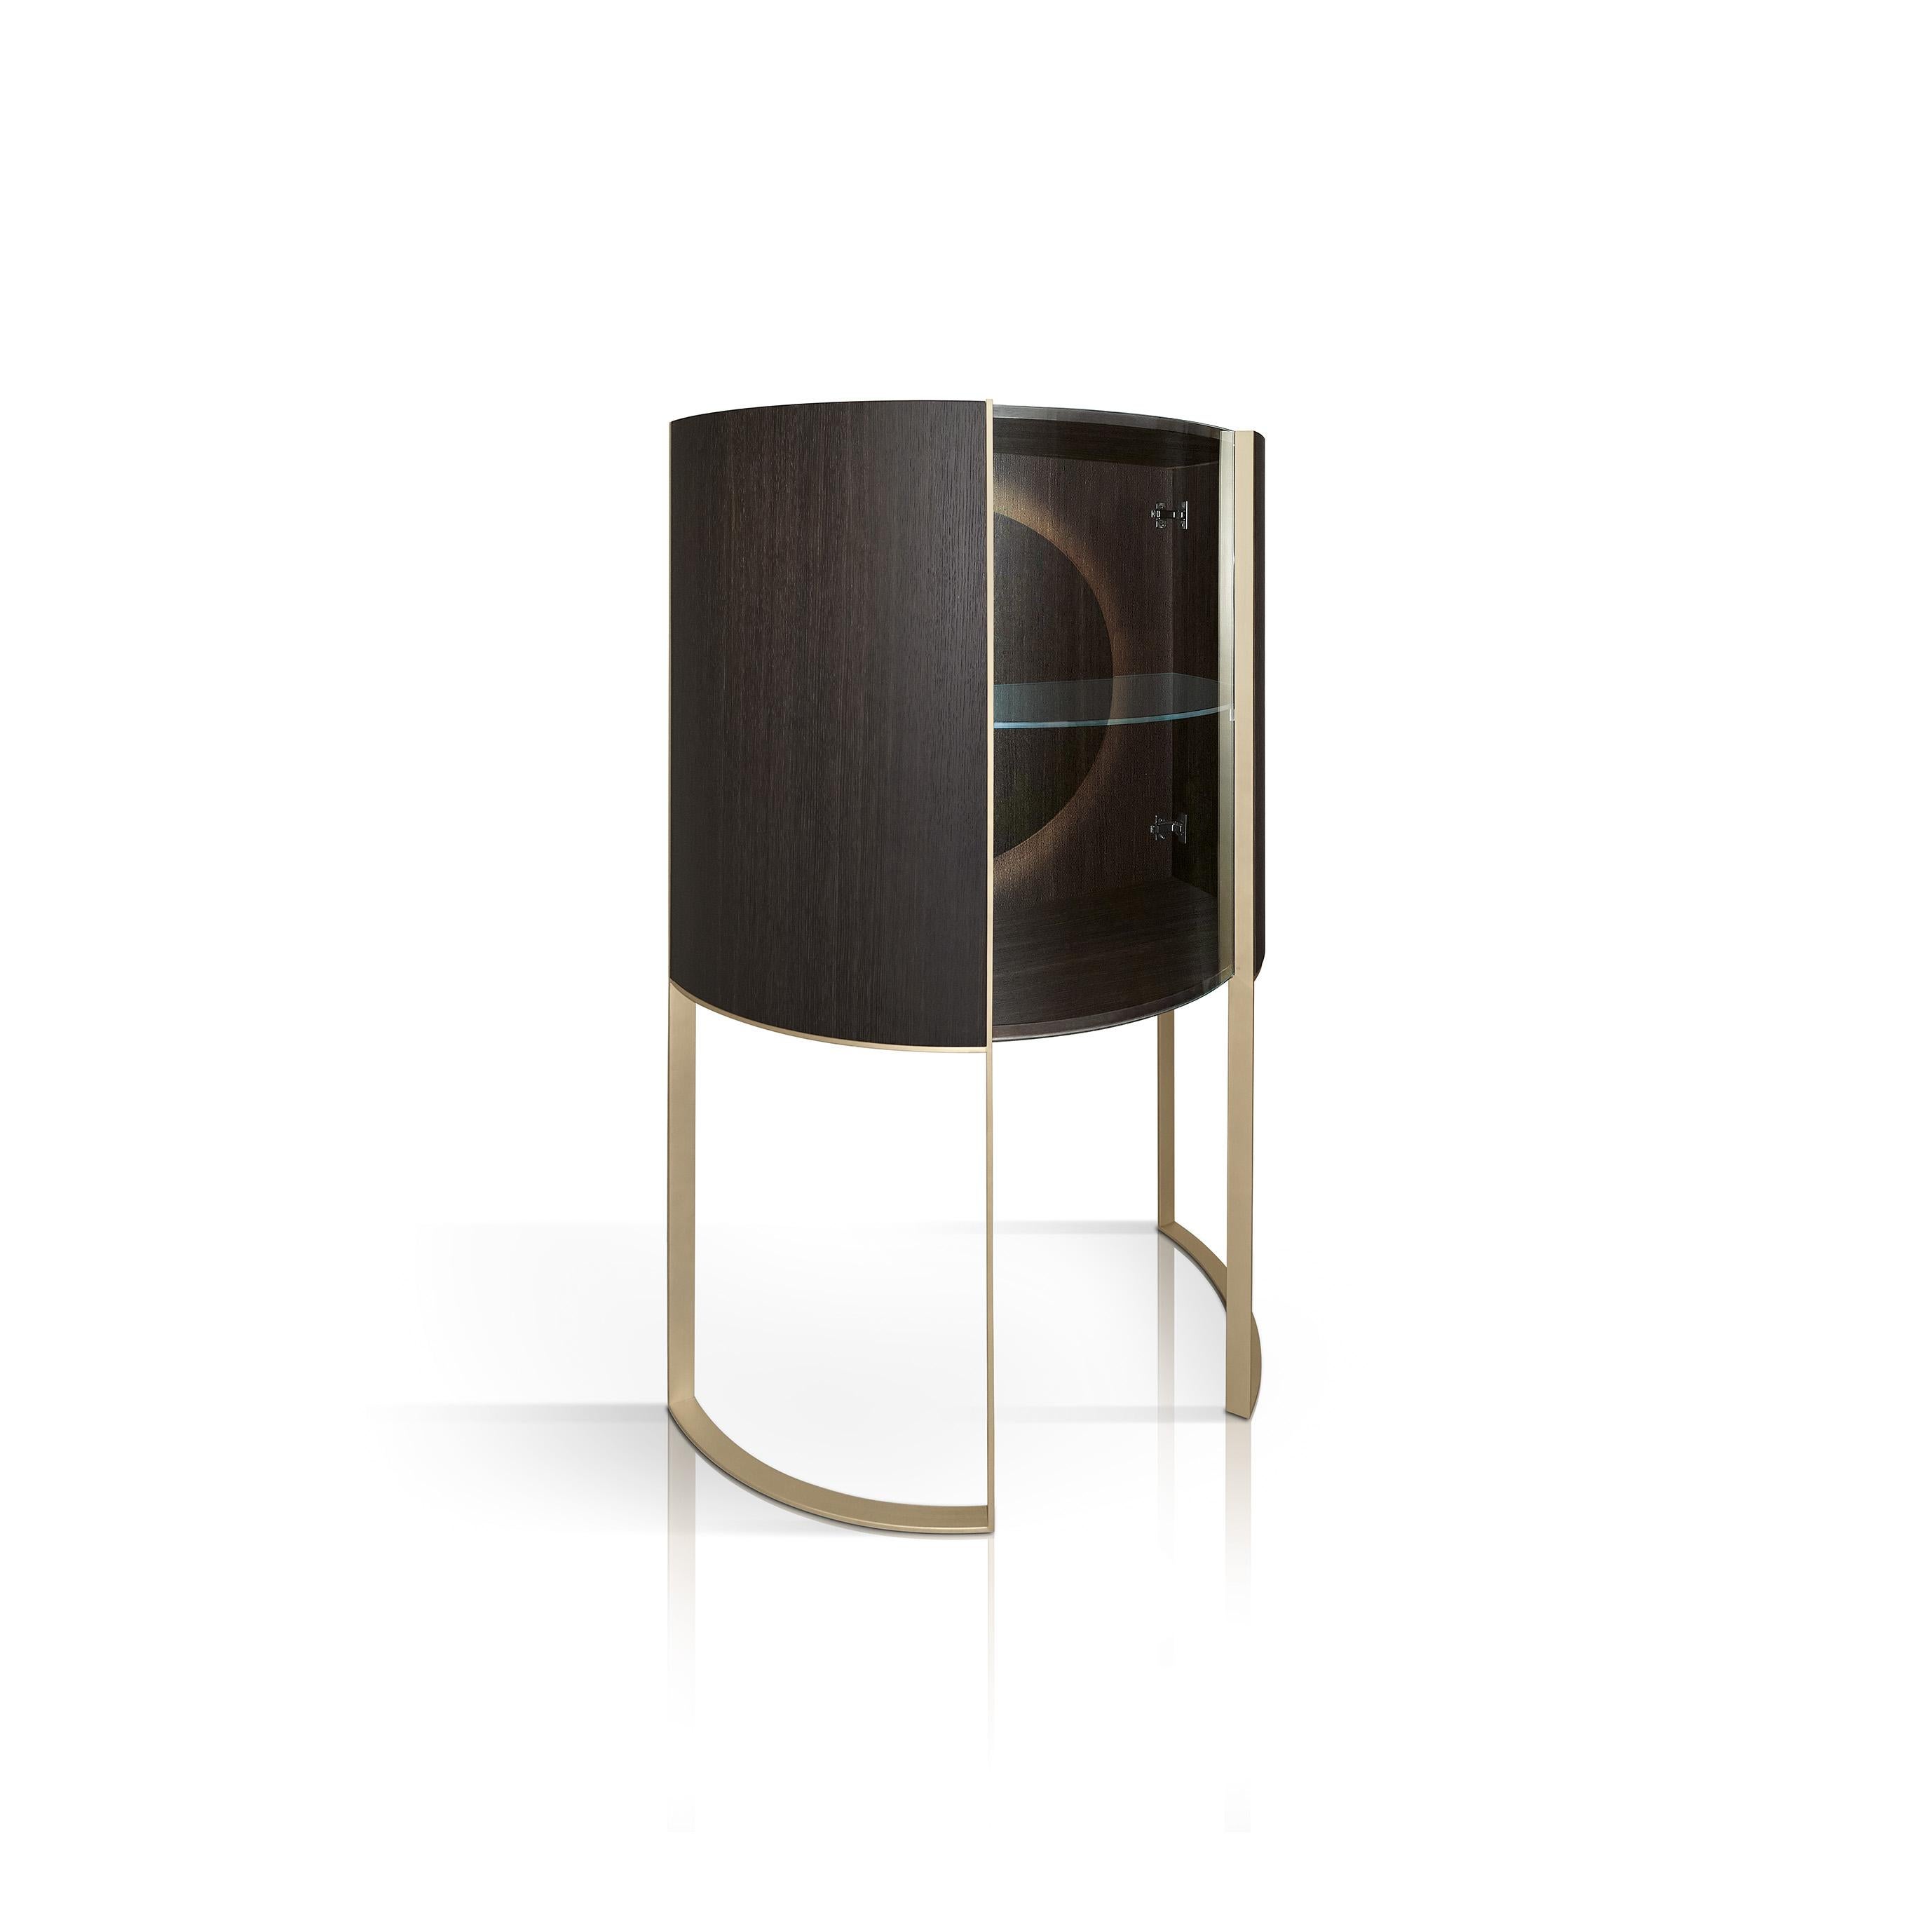 Modern functionality and harmonious aesthetics merge in this stunning display cabinet that brings to life the Classic concept of the showcase in a unique, modern design. The open base, with two brass U-shaped legs that follow the round profile of